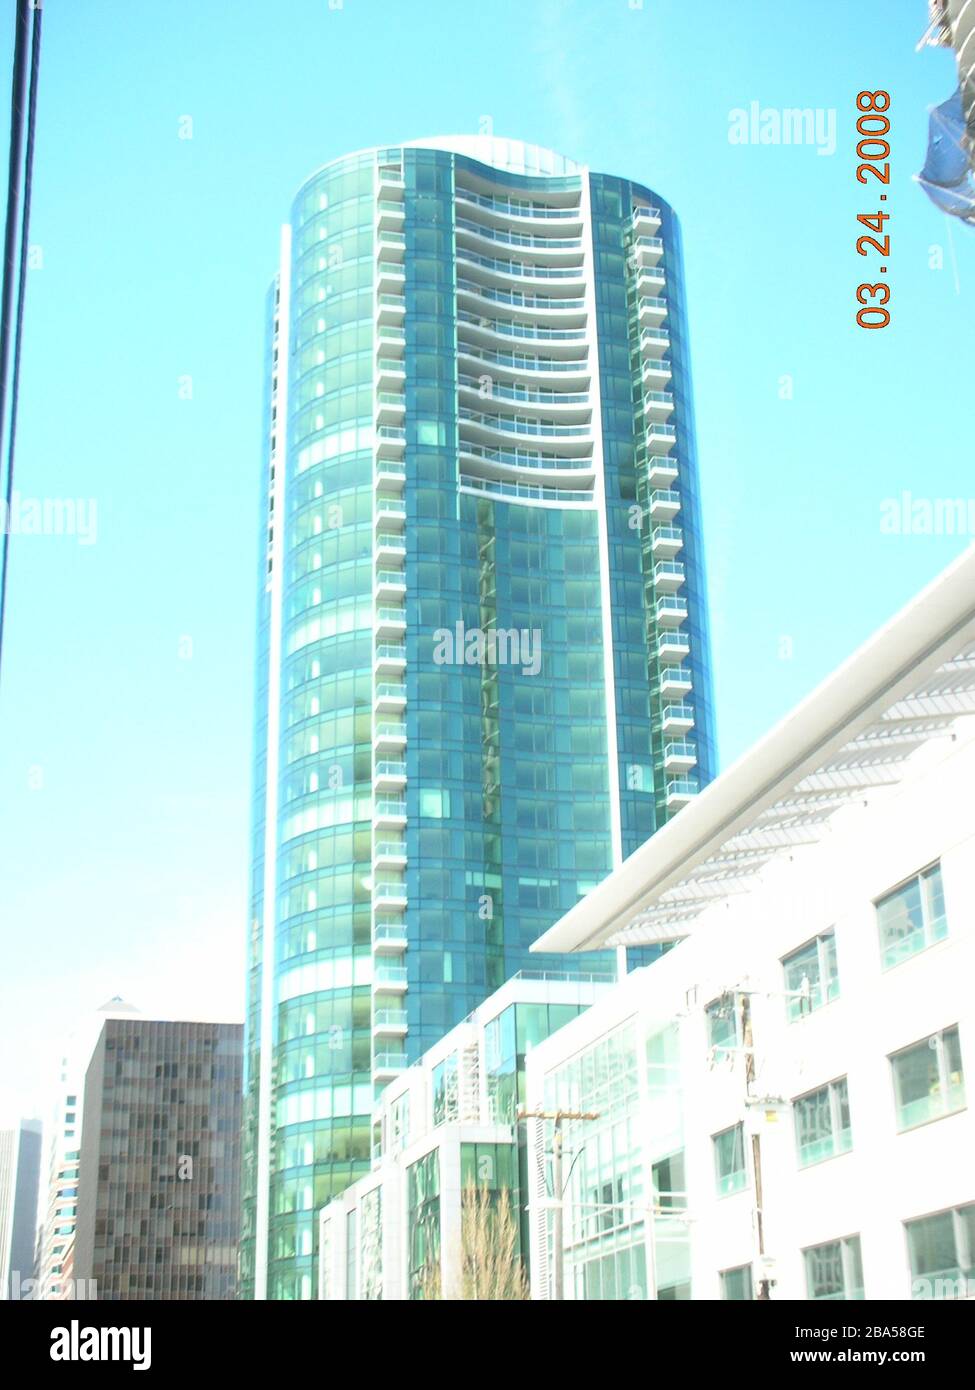 'English: The completed and open Infinity (300 Spear Street) tower II.; 24 March 2008; Own work (Original text:  I created this work entirely by myself.); Cheers. Trance addict - Armin van Buuren - Oceanlab; ' Stock Photo